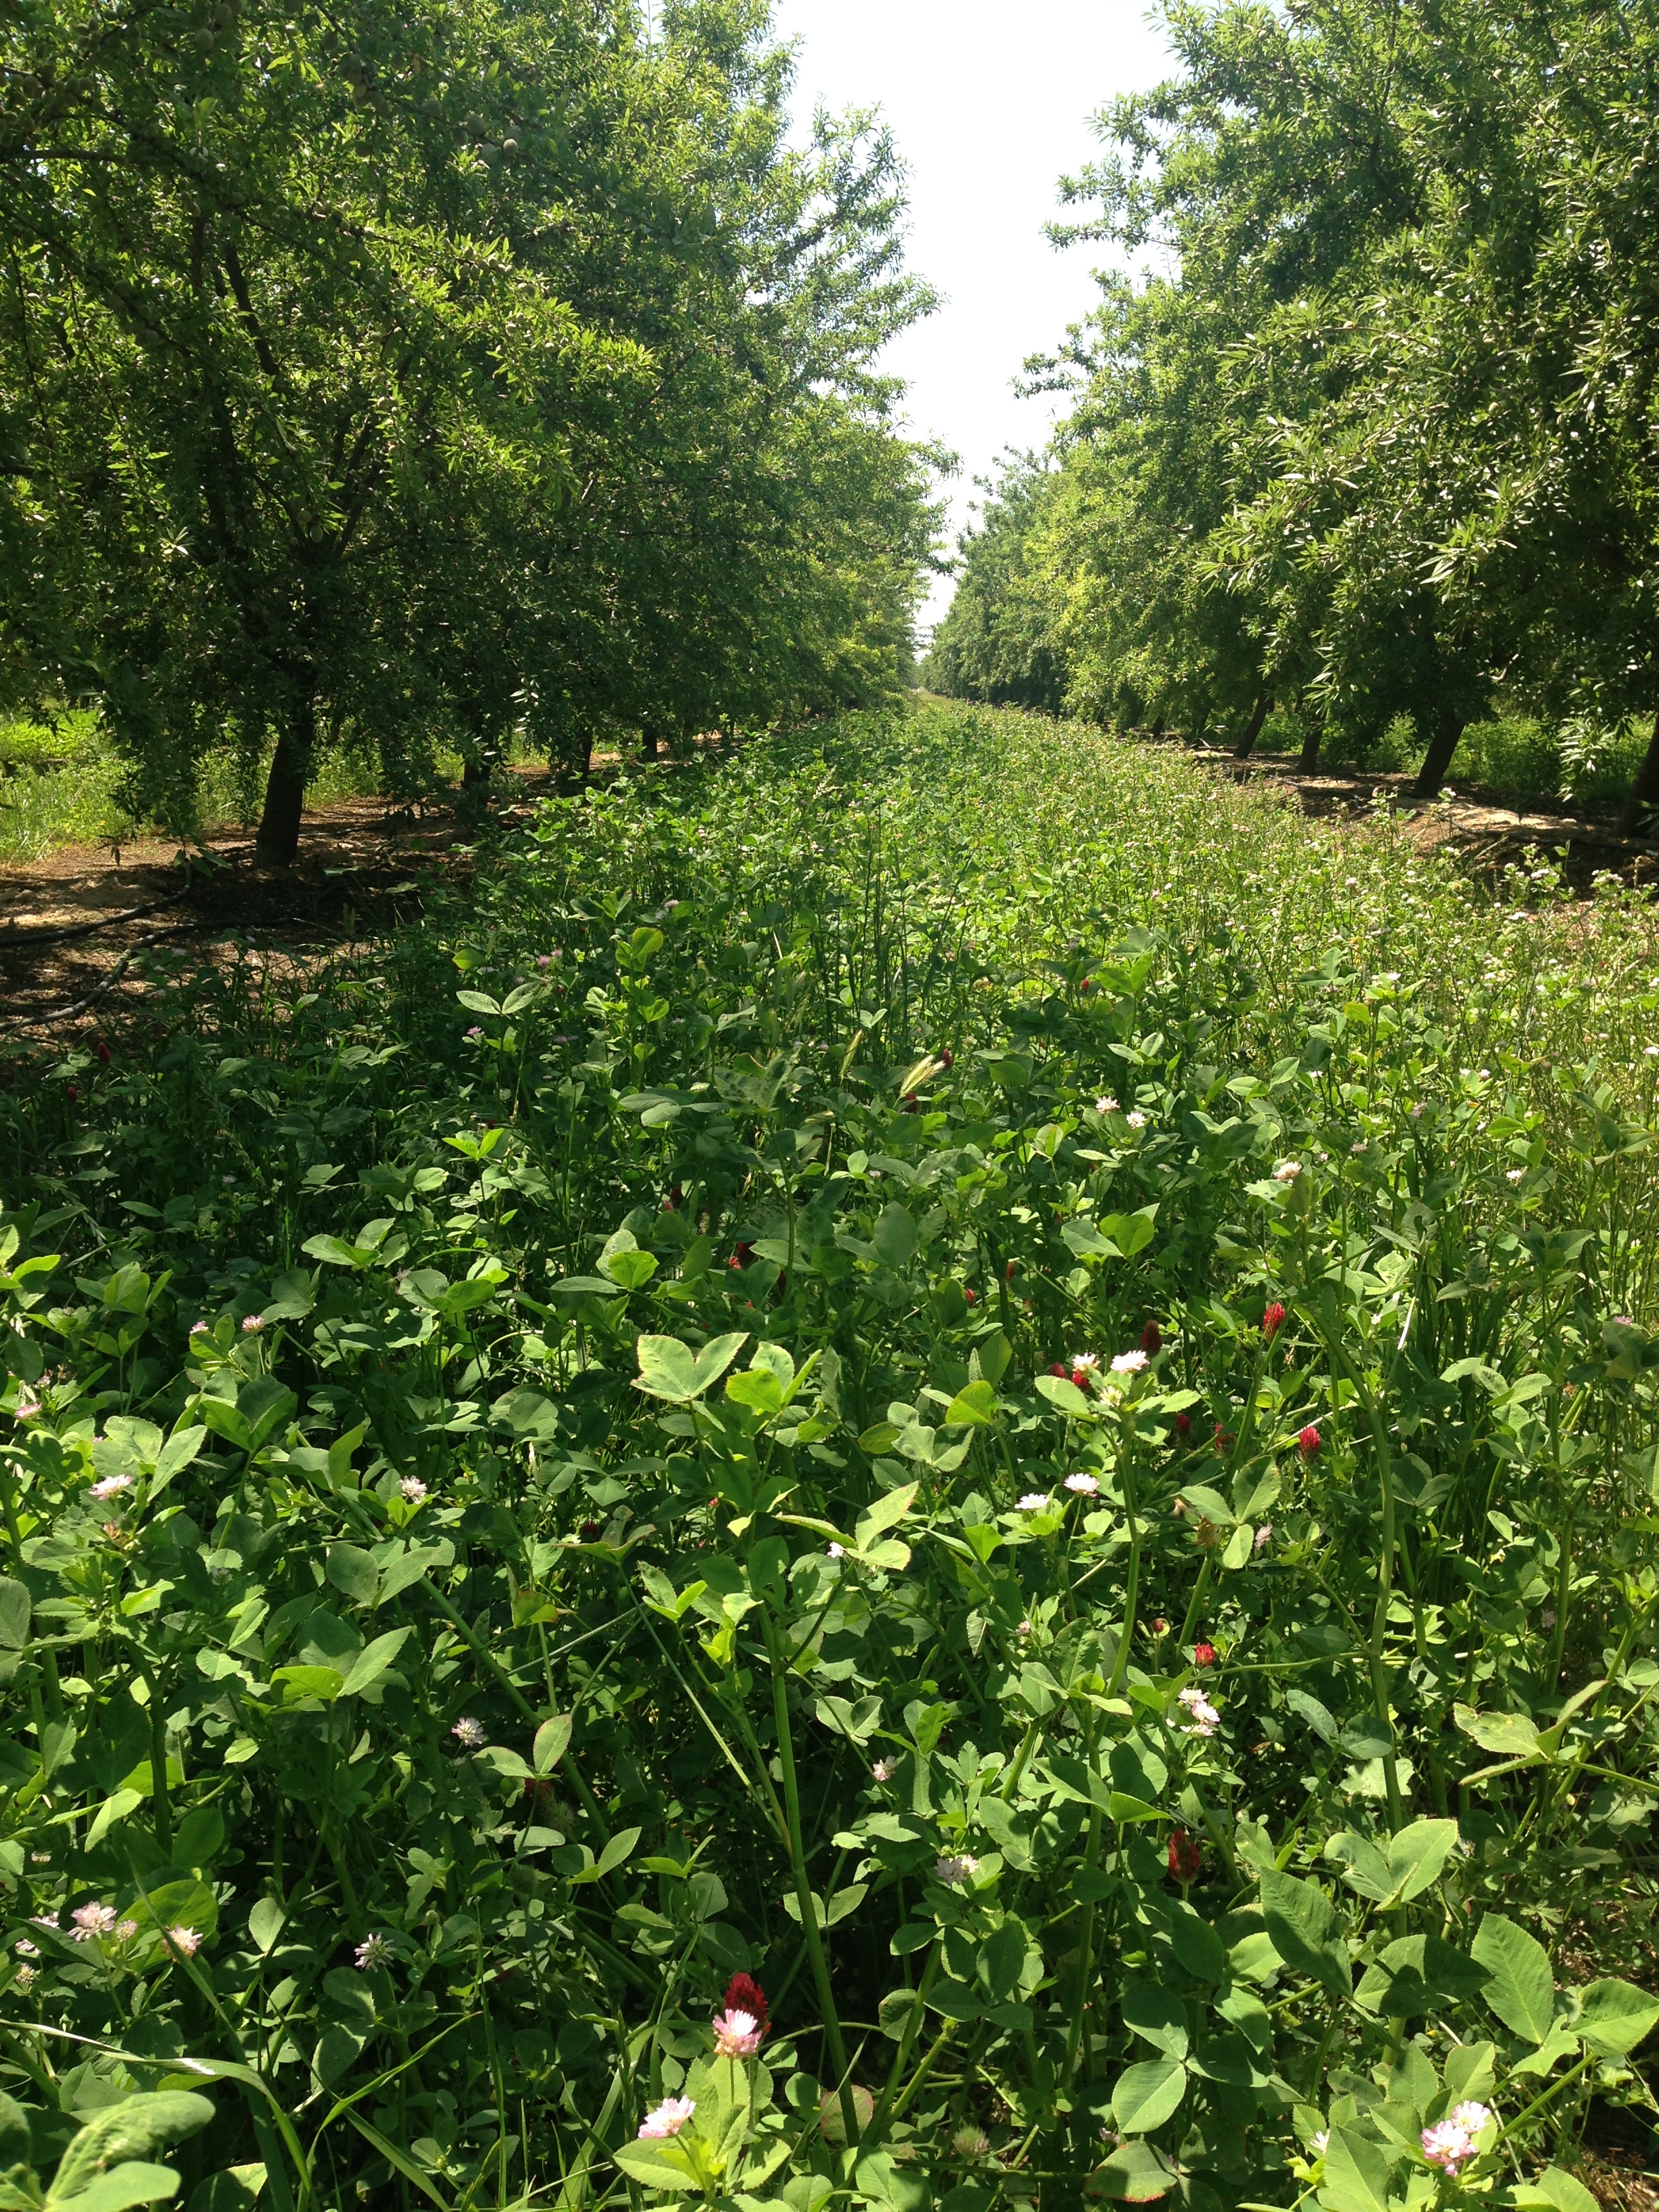 A lush scene is shown, in which a verdant orchard is viewed from below, showcasing its equally verdant clover cover crop, with red blossoms peppered throughout.